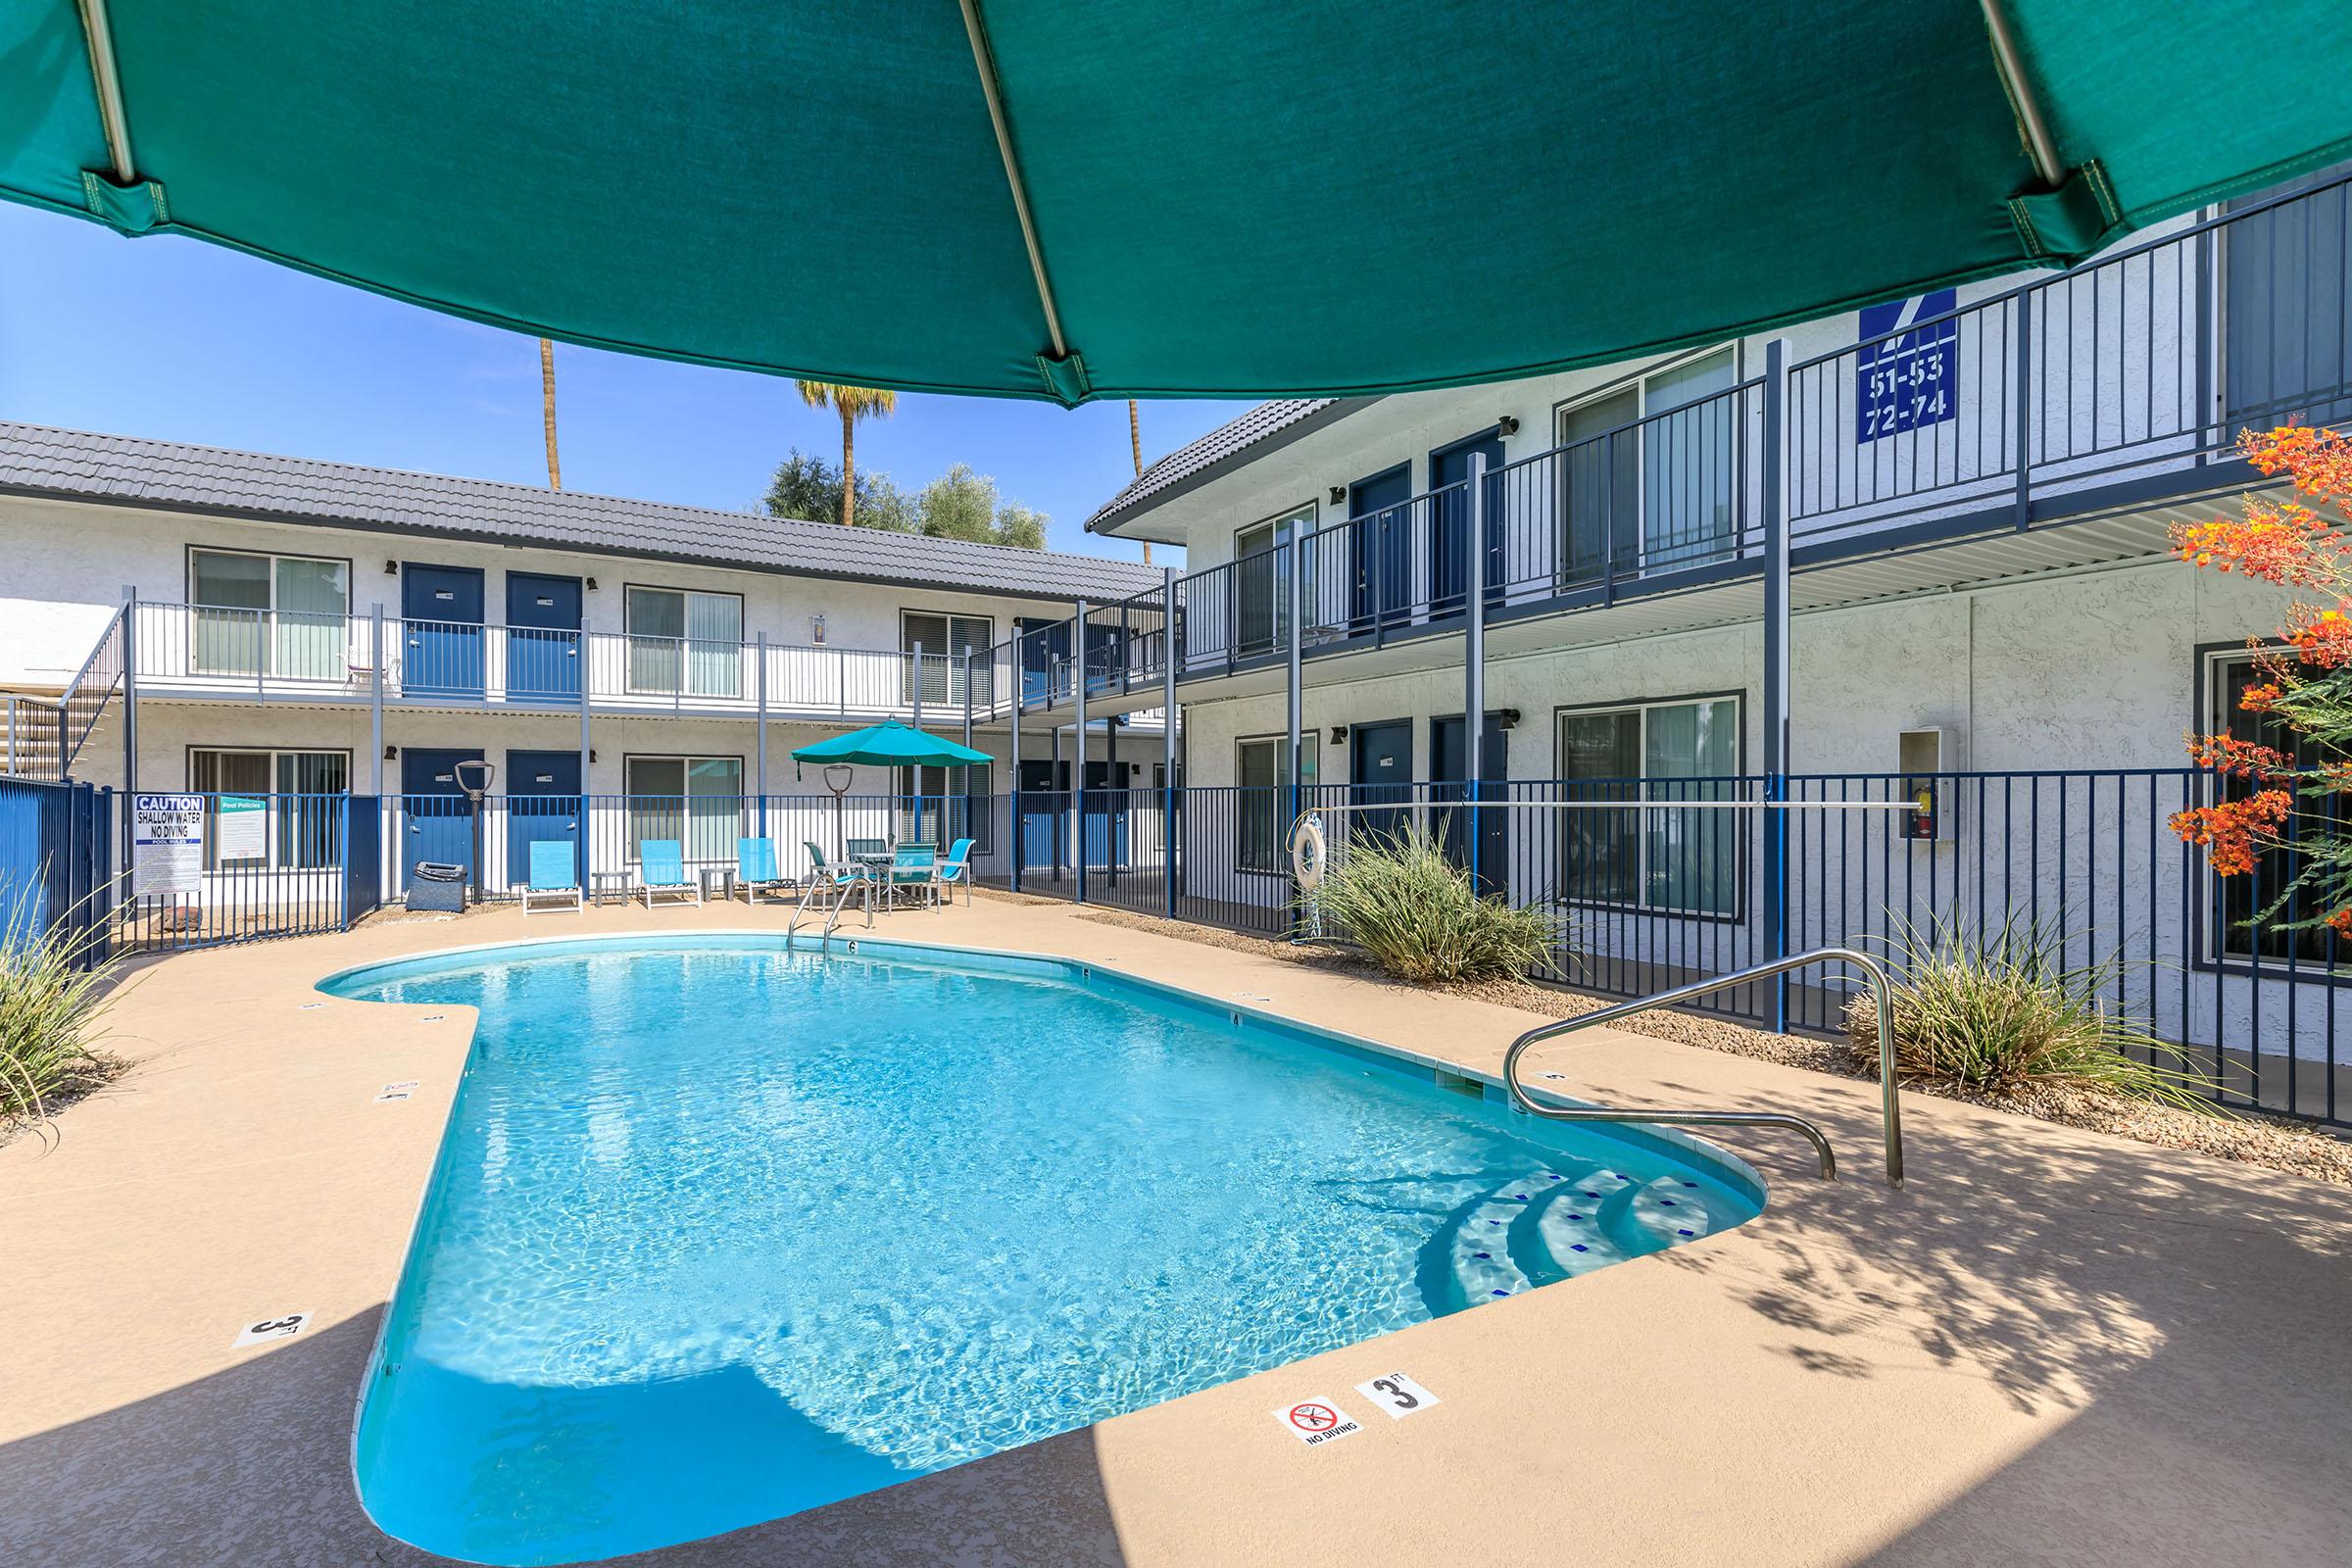 A sparkling blue swimming pool with loungers at Rise at the Lofts. 